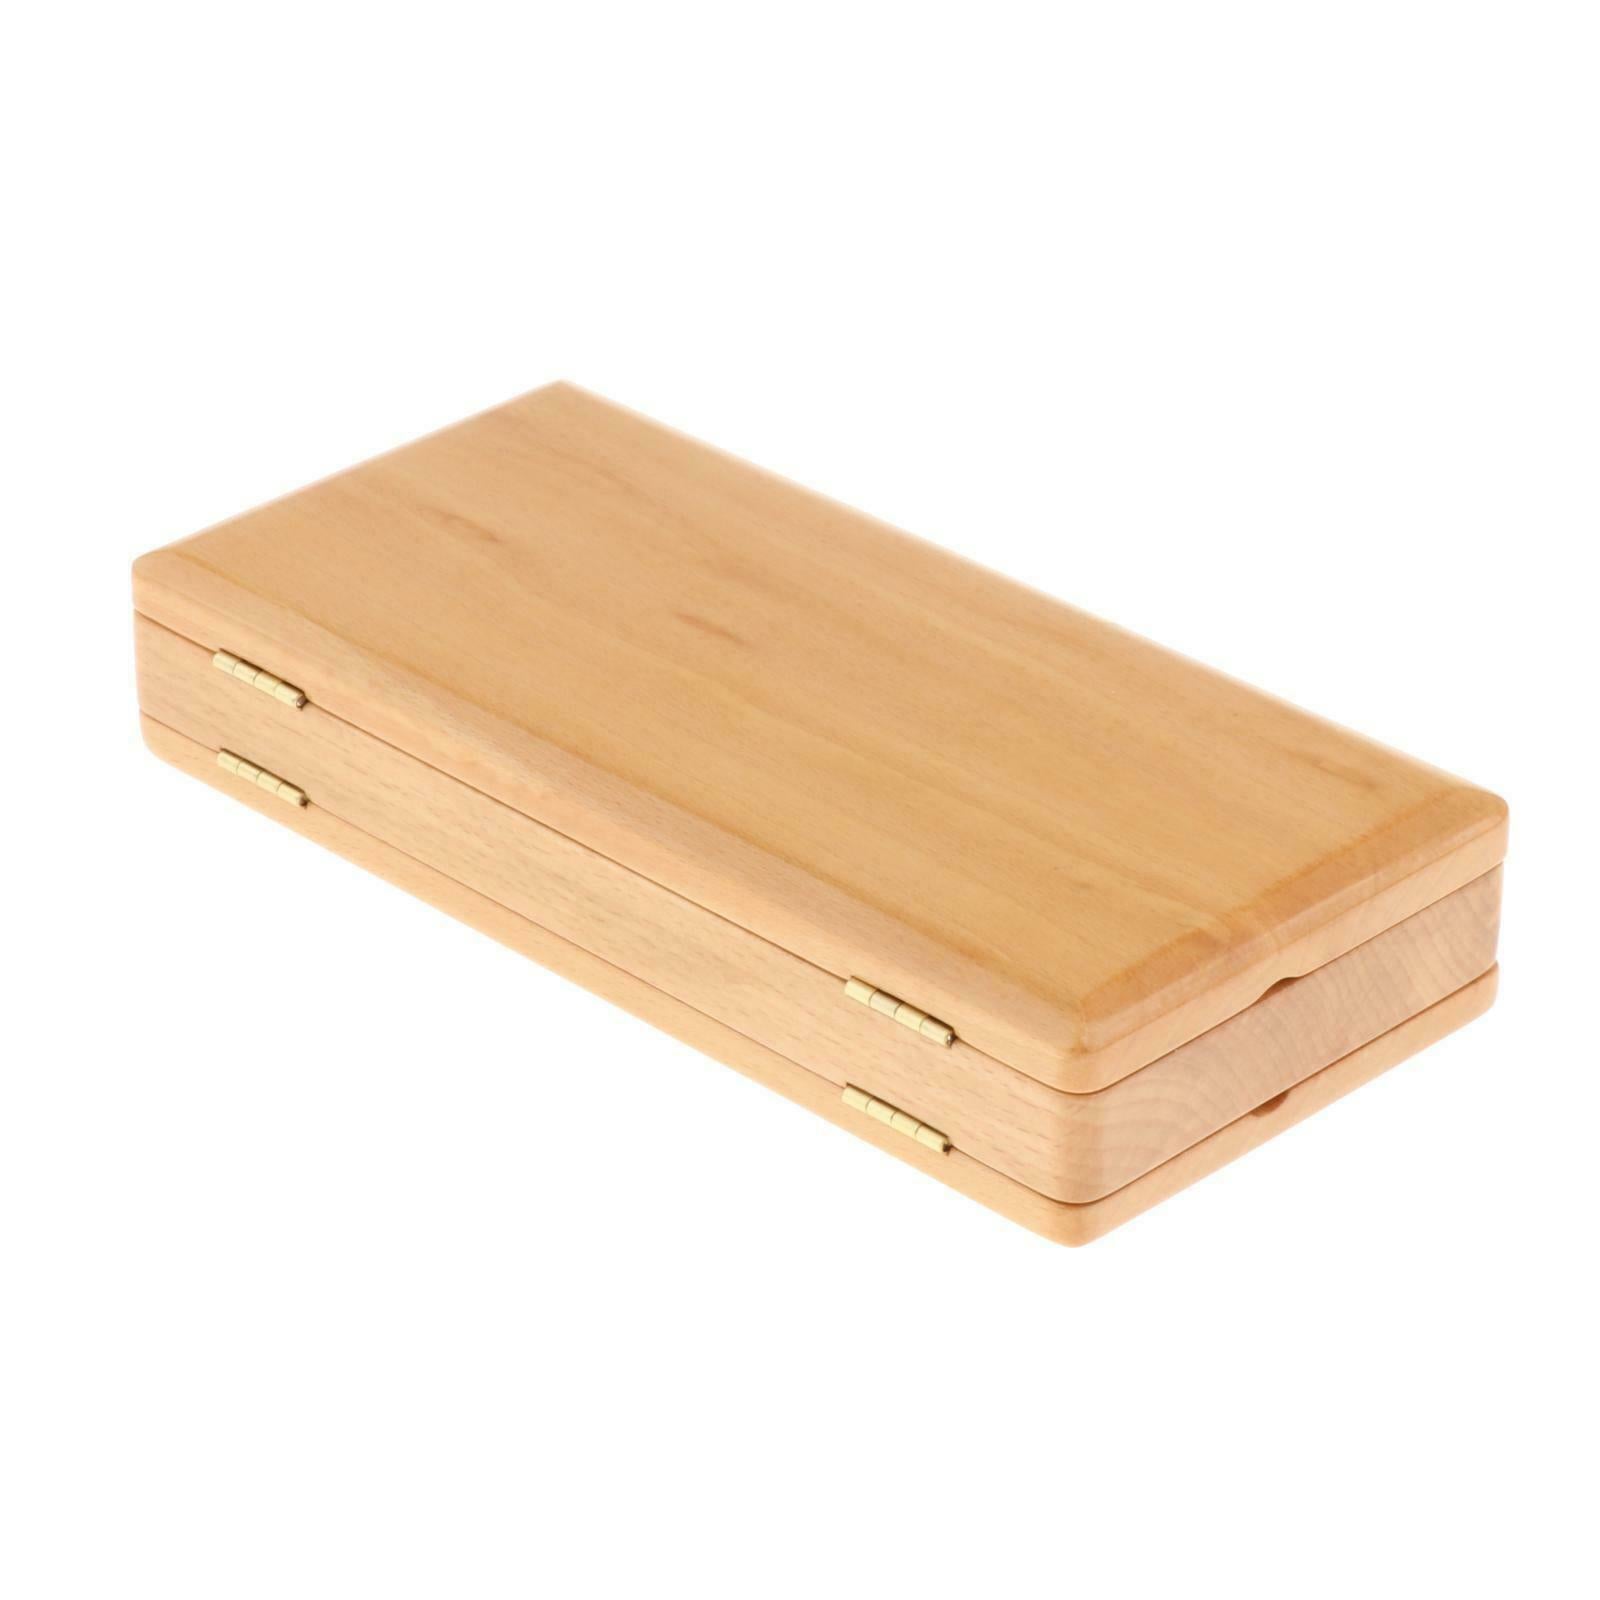 Oboe Reed Case Wooden Box for Bassoon 40pcs Reeds Woodwind Instrument Parts